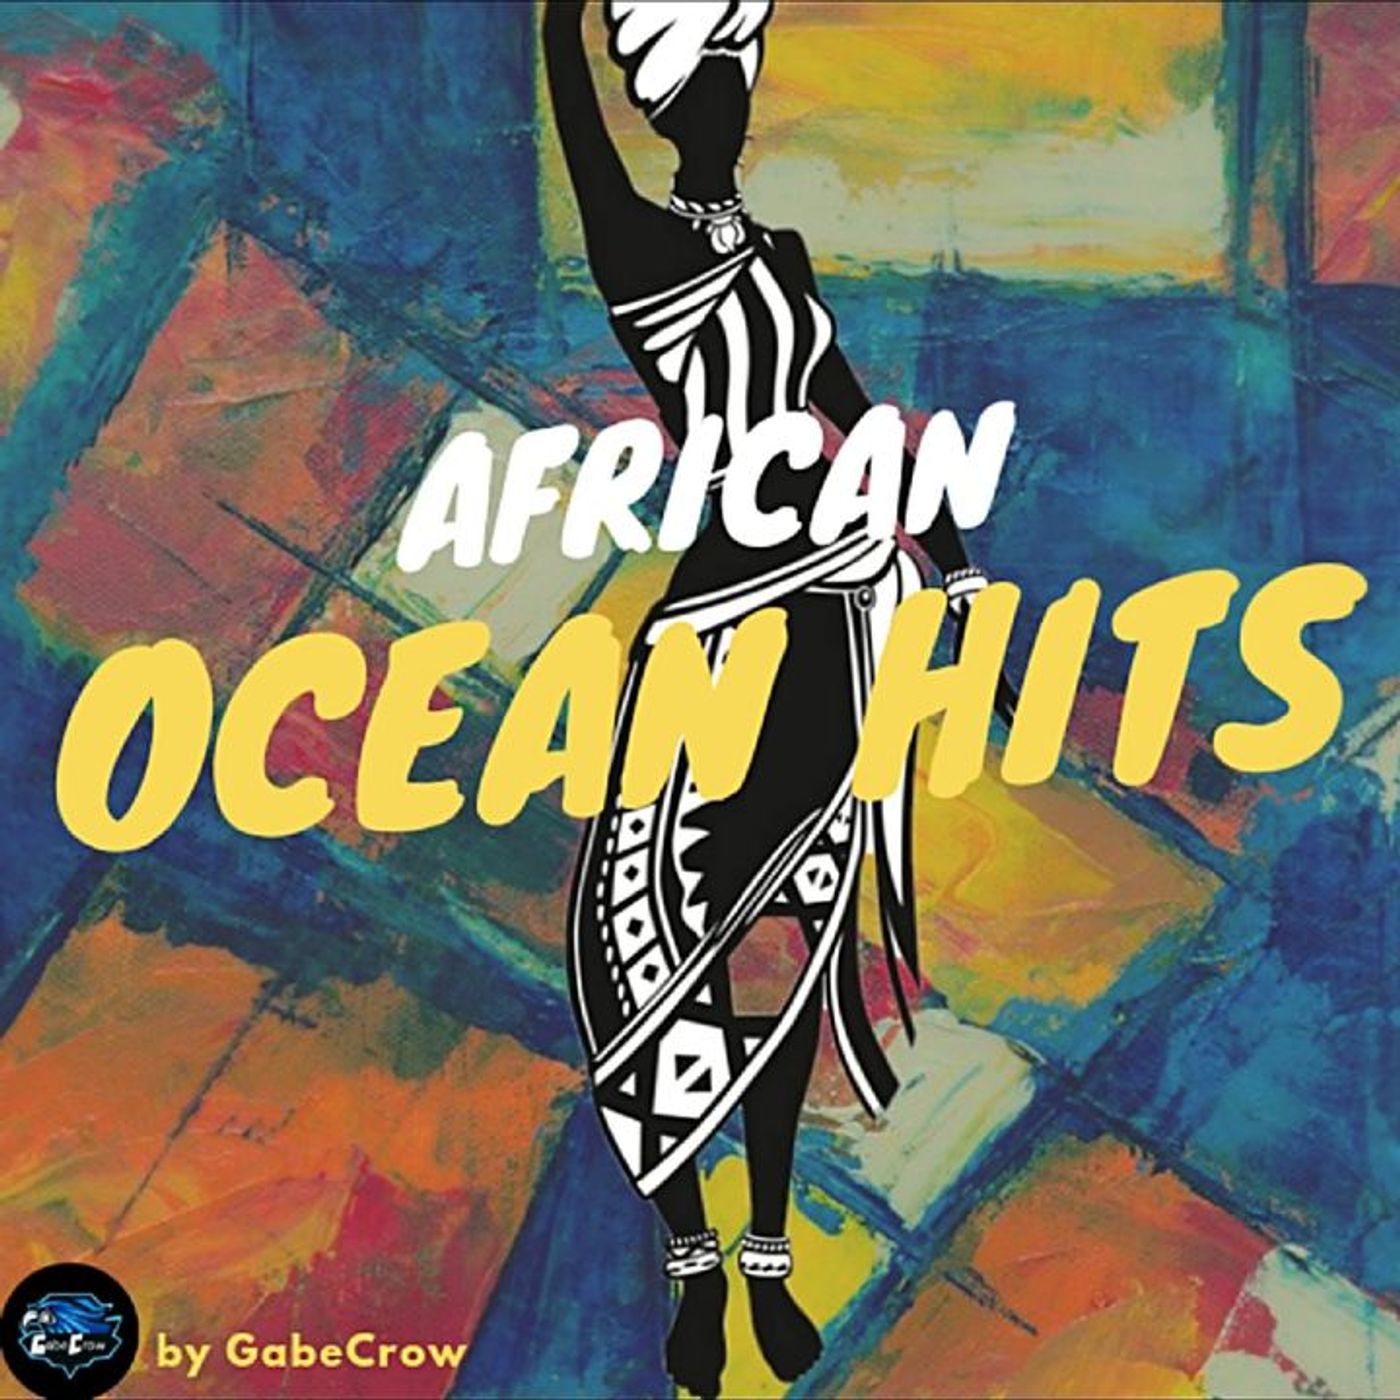 African Ocean Hits_EP#003 (PART A)